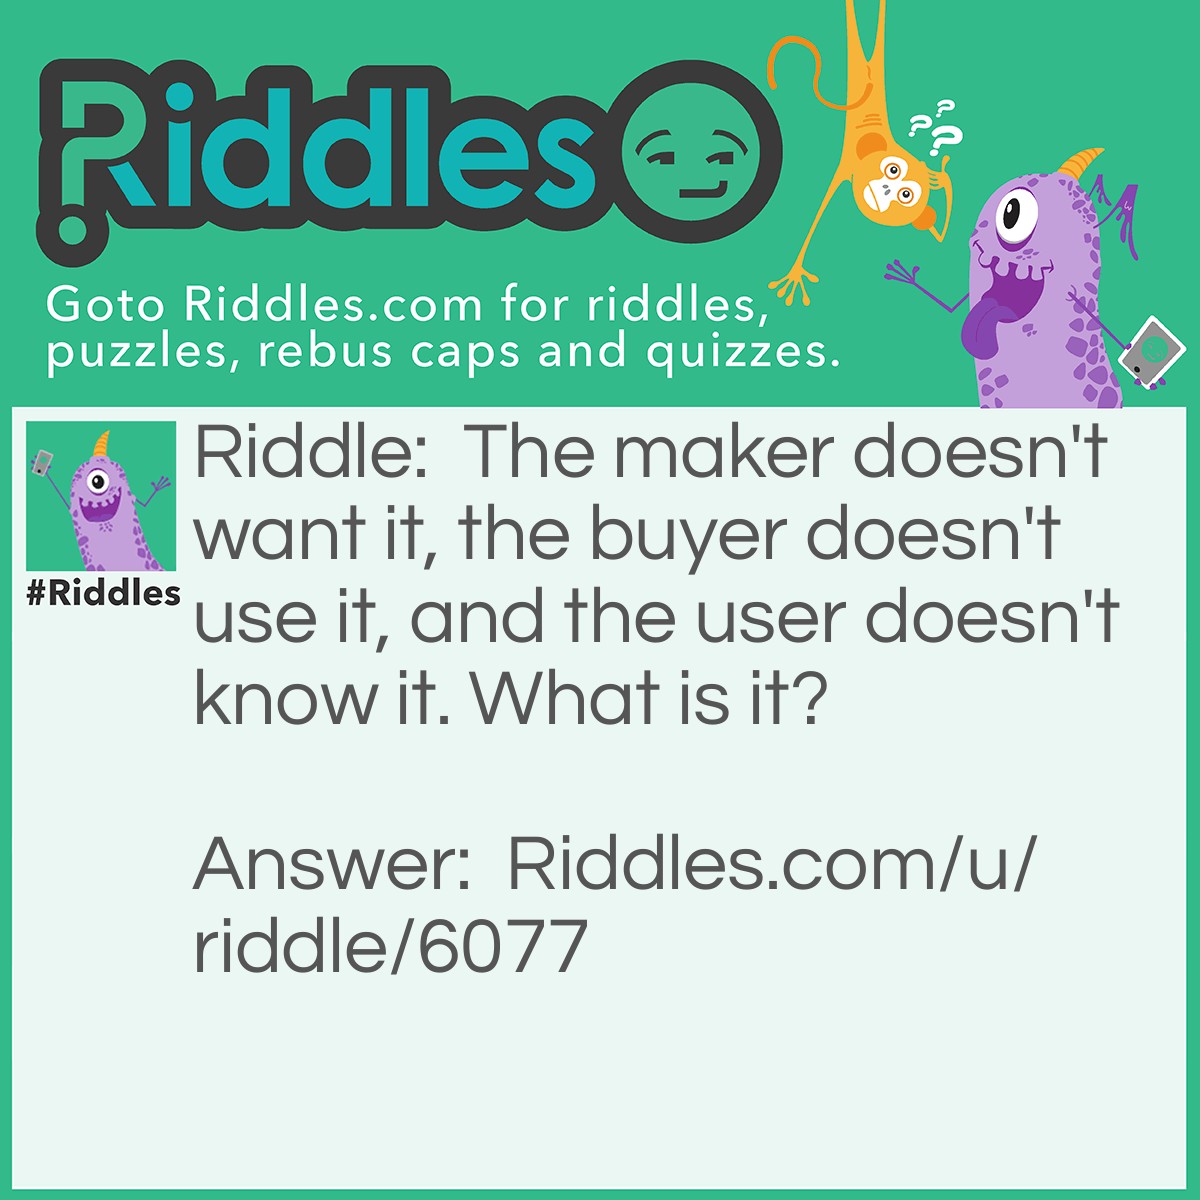 Riddle: The maker doesn't want it, the buyer doesn't use it, and the user doesn't know it. What is it? Answer: A coffin.